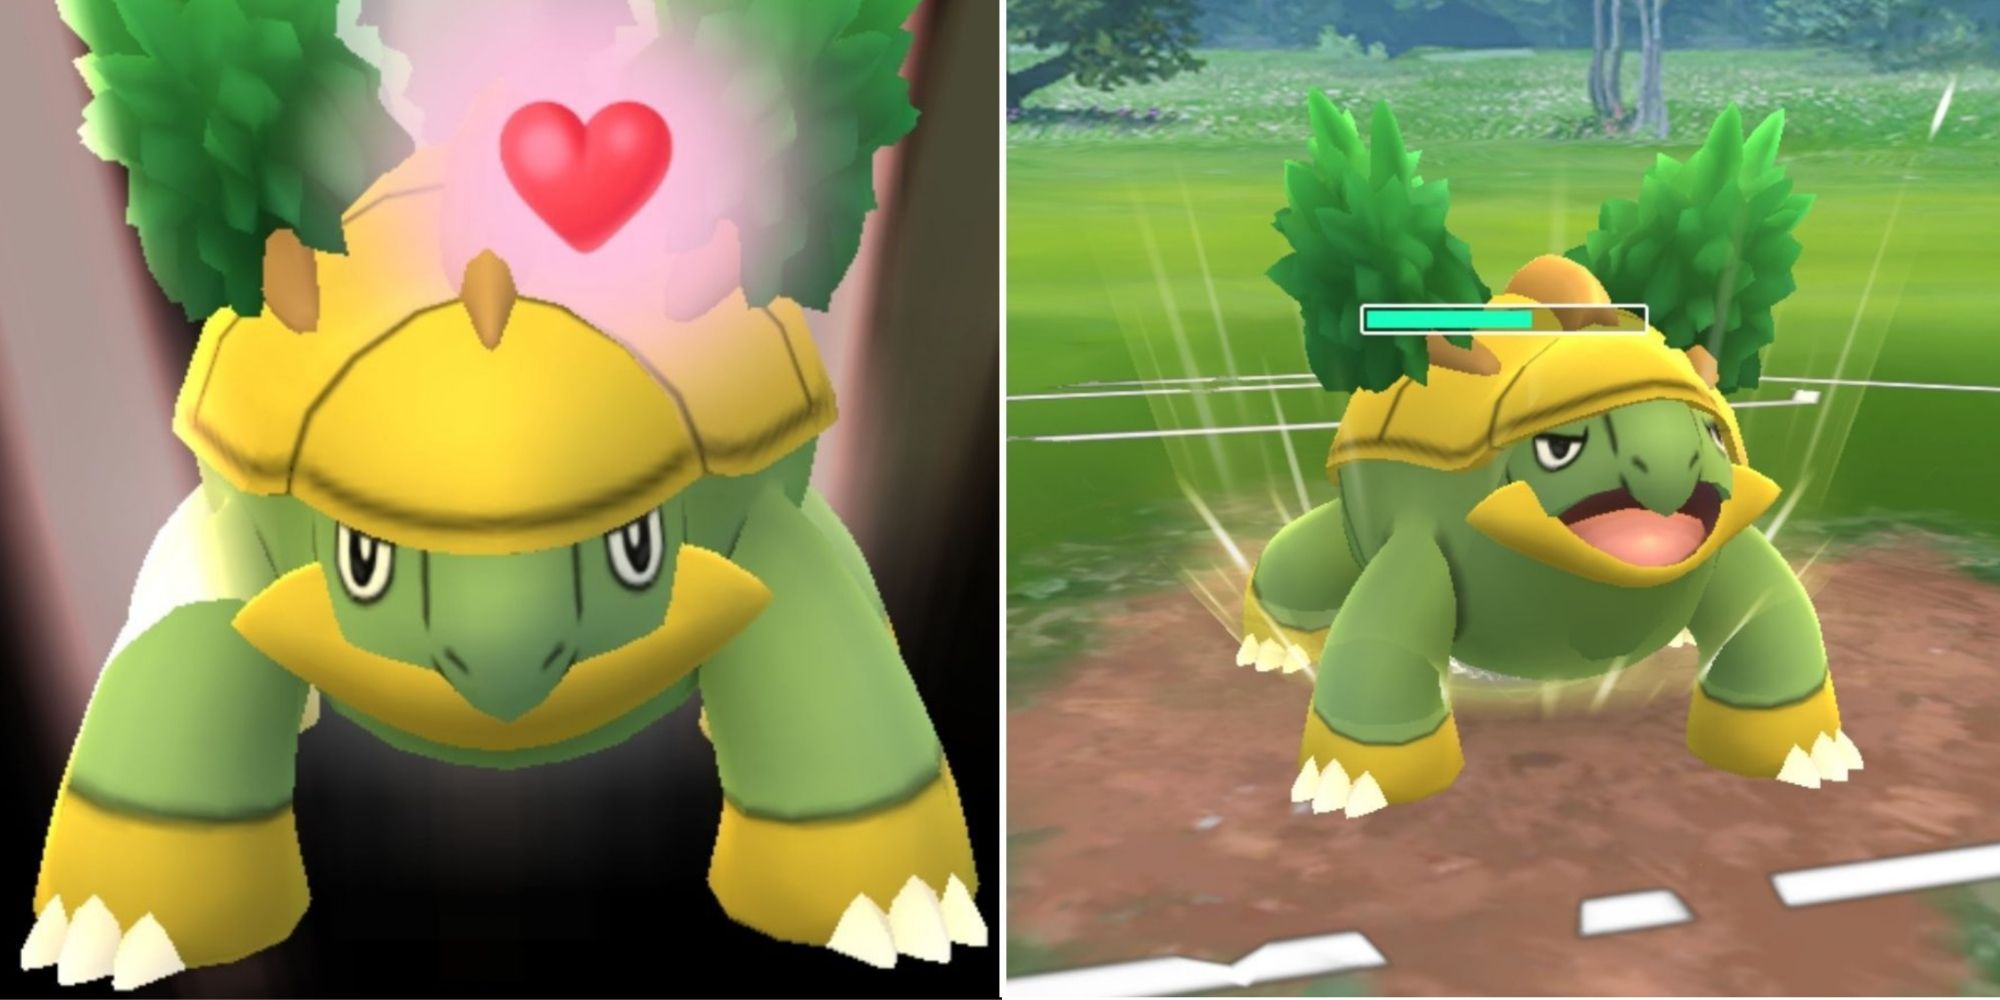 Split image screenshots of Grotle with a heart and Grotle in battle in Pokemon Go